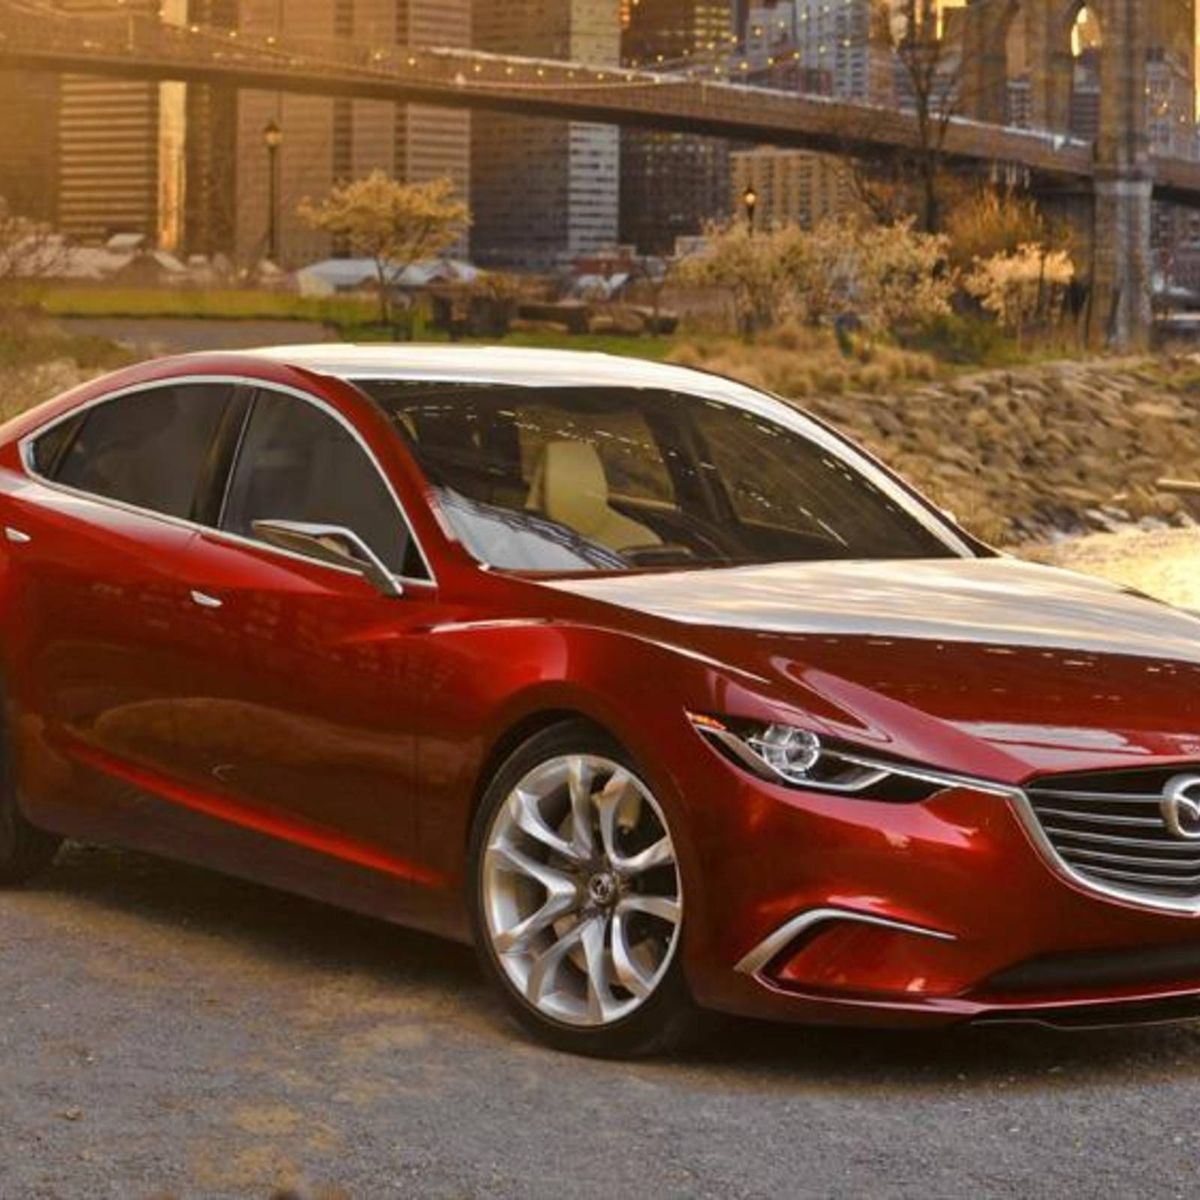 The 2025 Mazda 6 Sedan: Everything You Need to Know